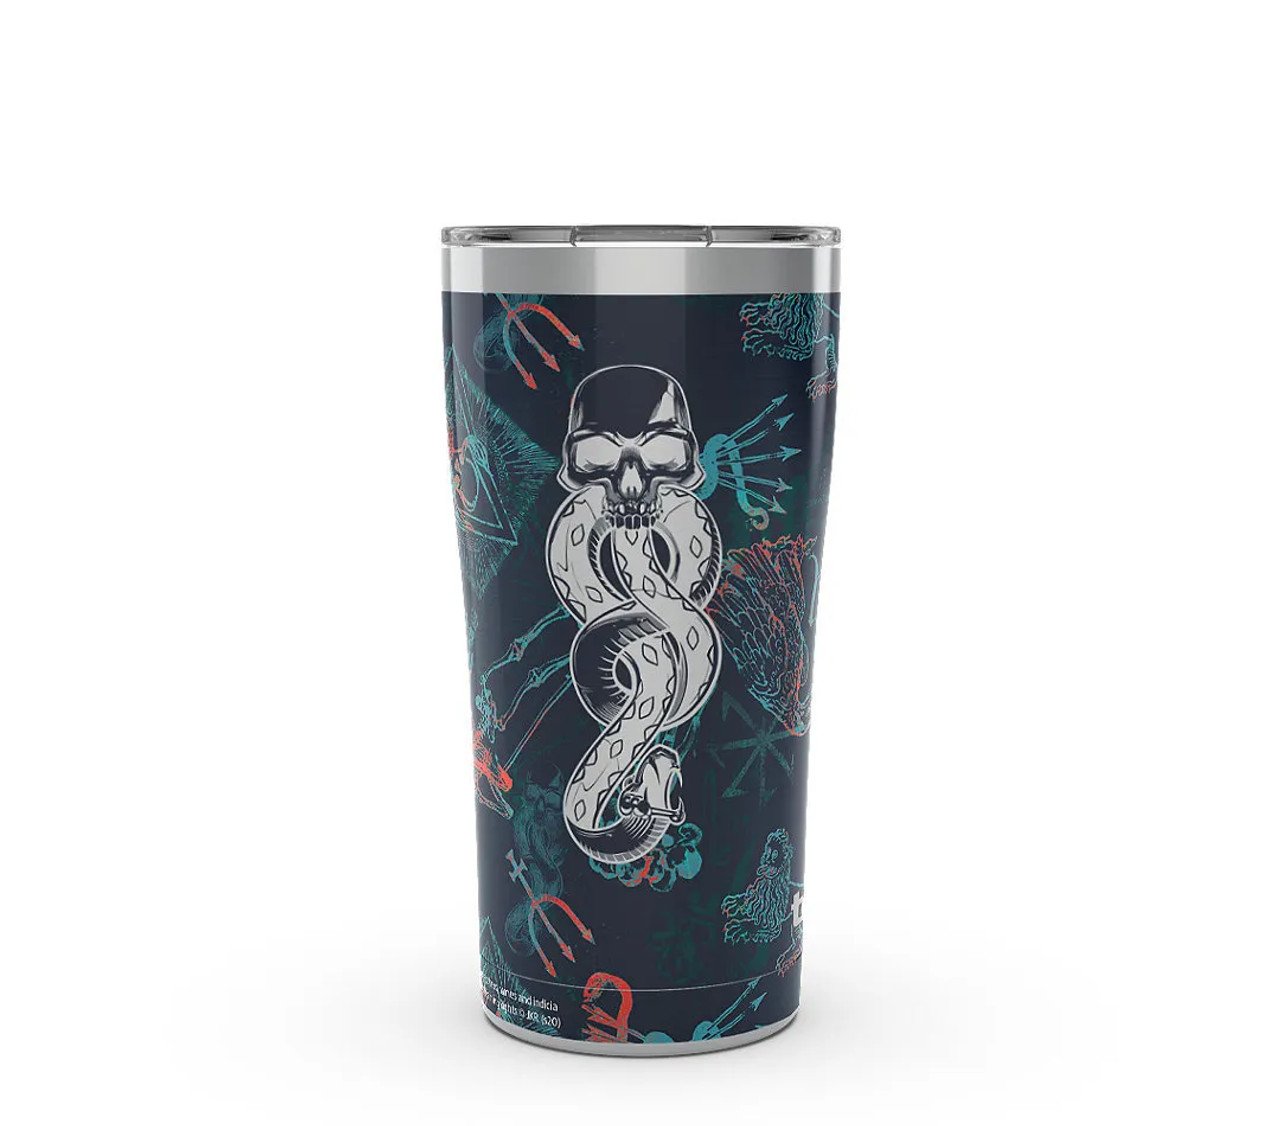 https://cdn11.bigcommerce.com/s-59t8stv95a/images/stencil/1280x1280/products/2428/3798/Retail_Product_Harry_Potter_Tervis_tumbler__67830.1666371166.jpg?c=2